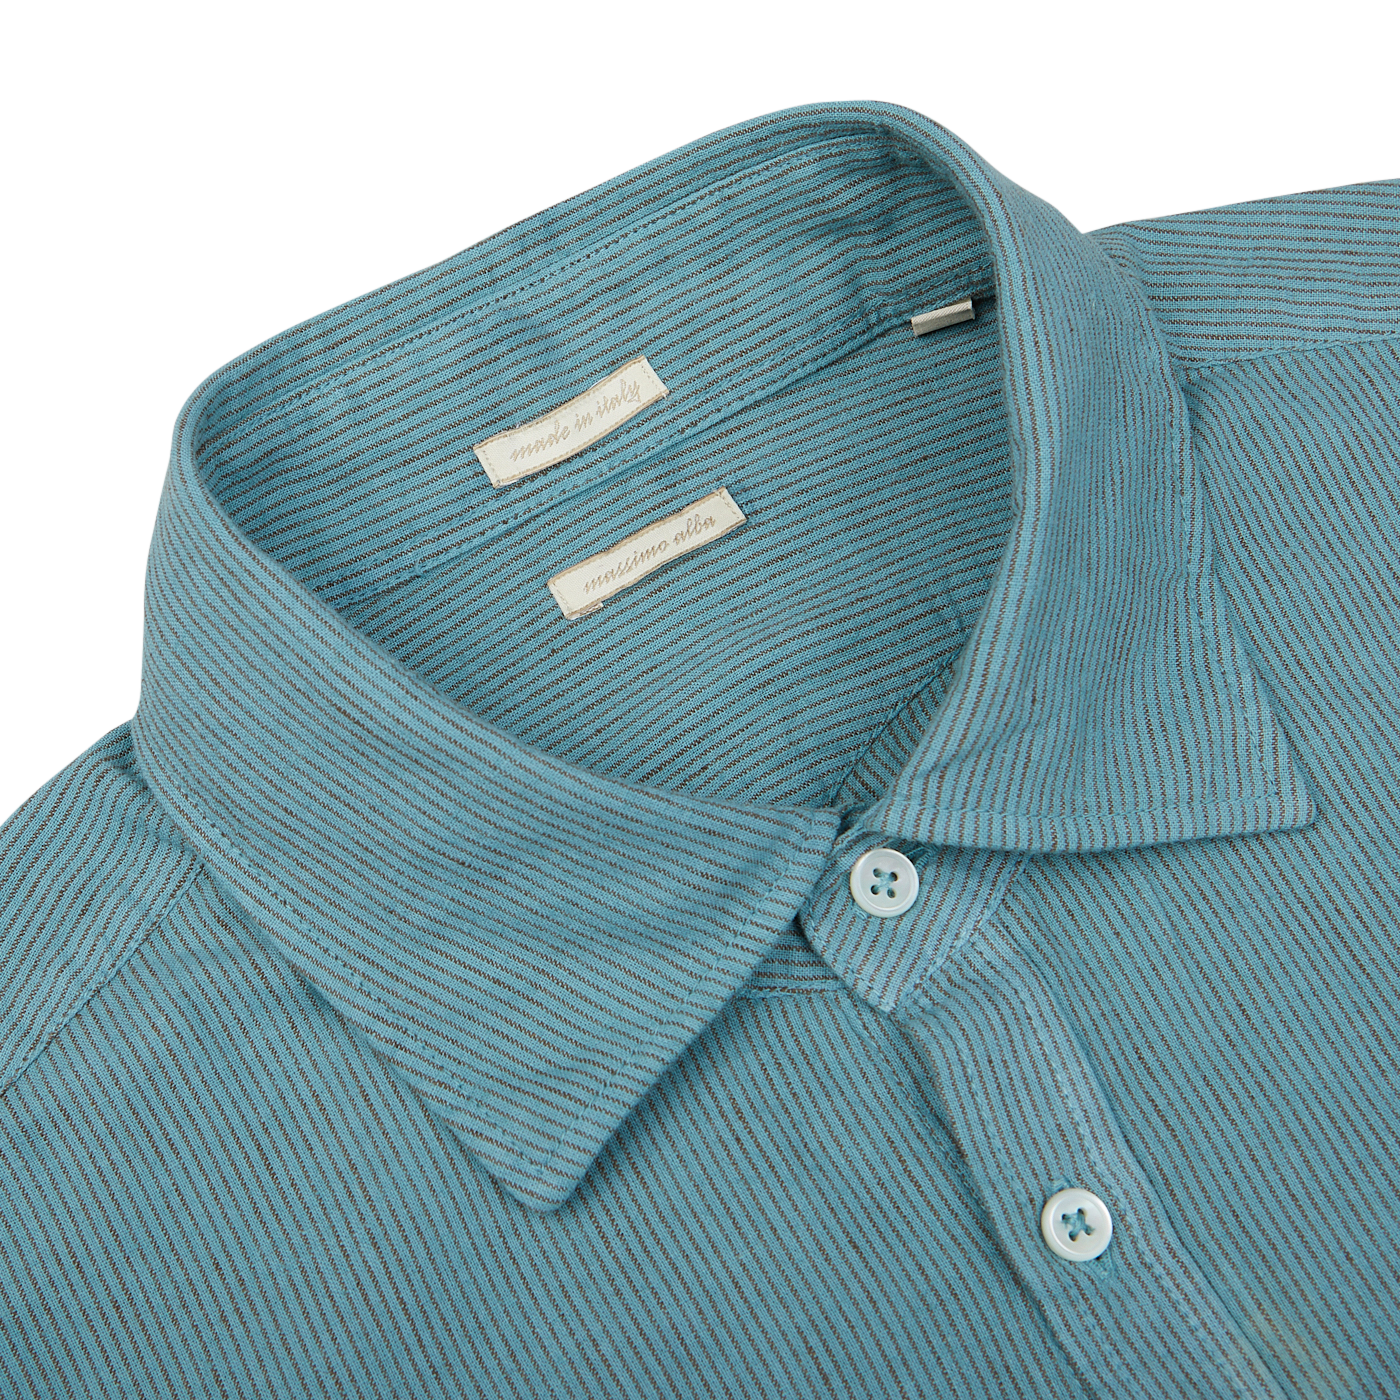 Close-up of a Turquoise Striped Cotton Linen Genova shirt collar from Massimo Alba with a buttoned neckline, made in Italy.